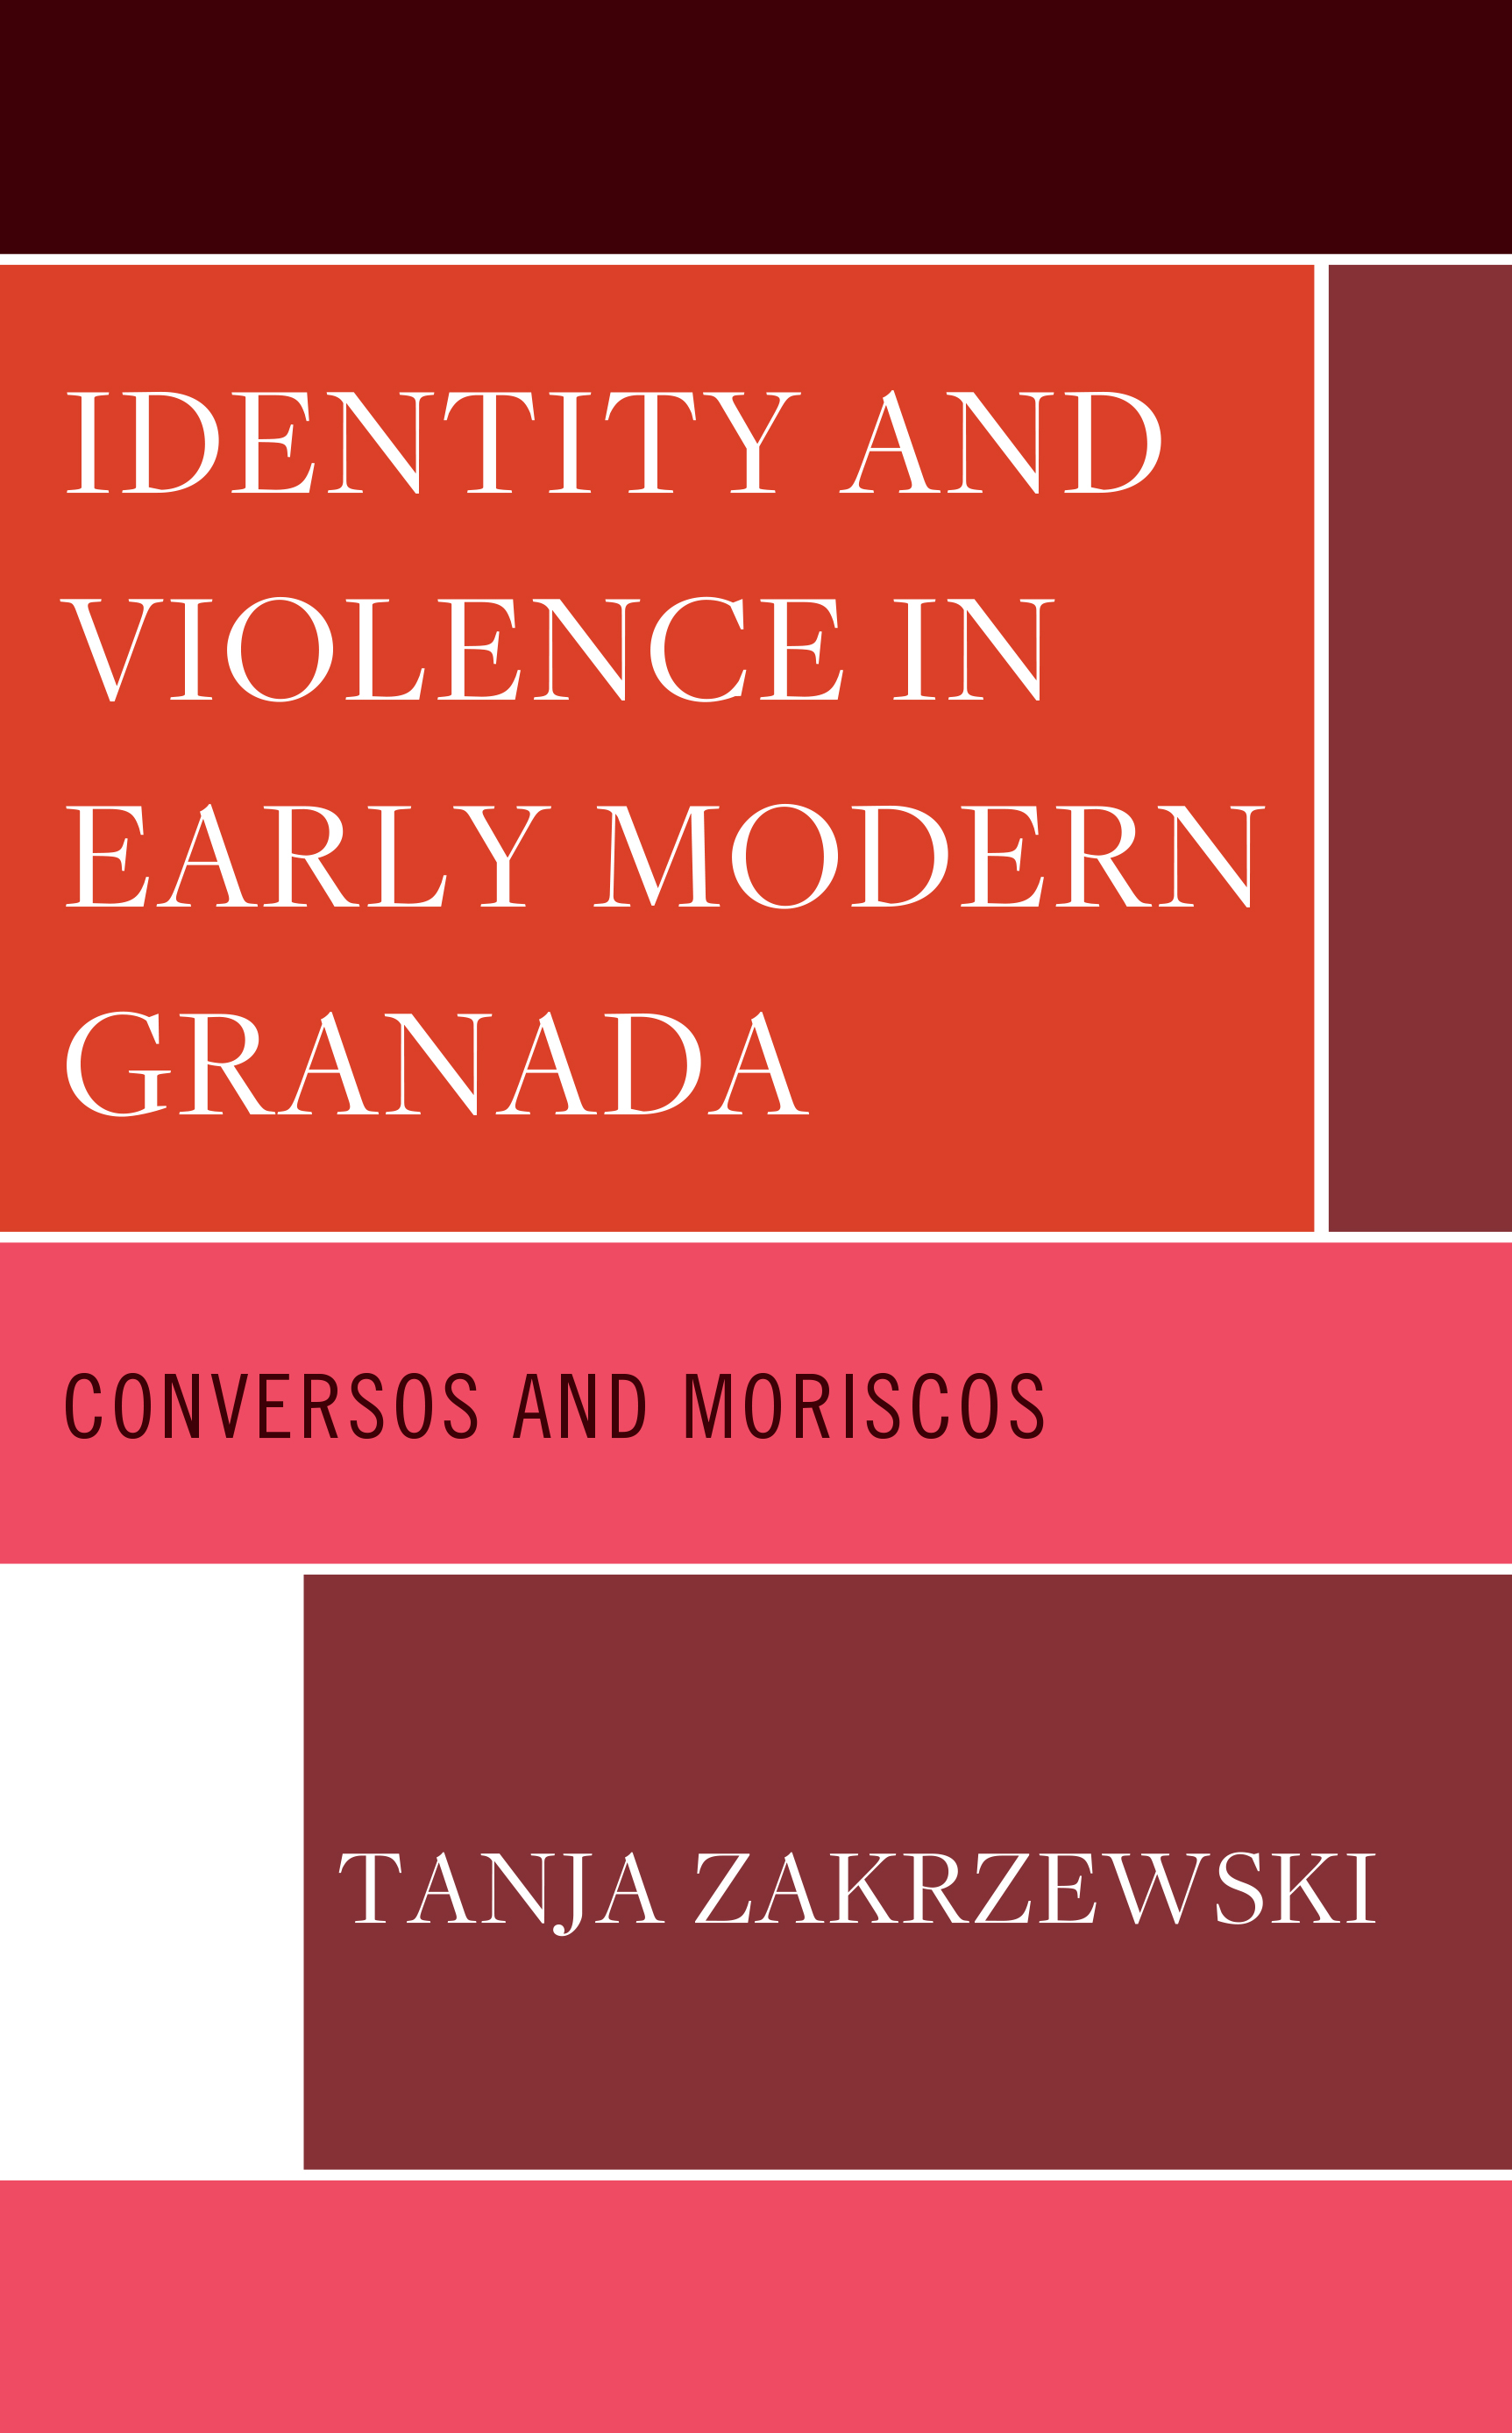 Identity and Violence in Early Modern Granada: Conversos and Moriscos